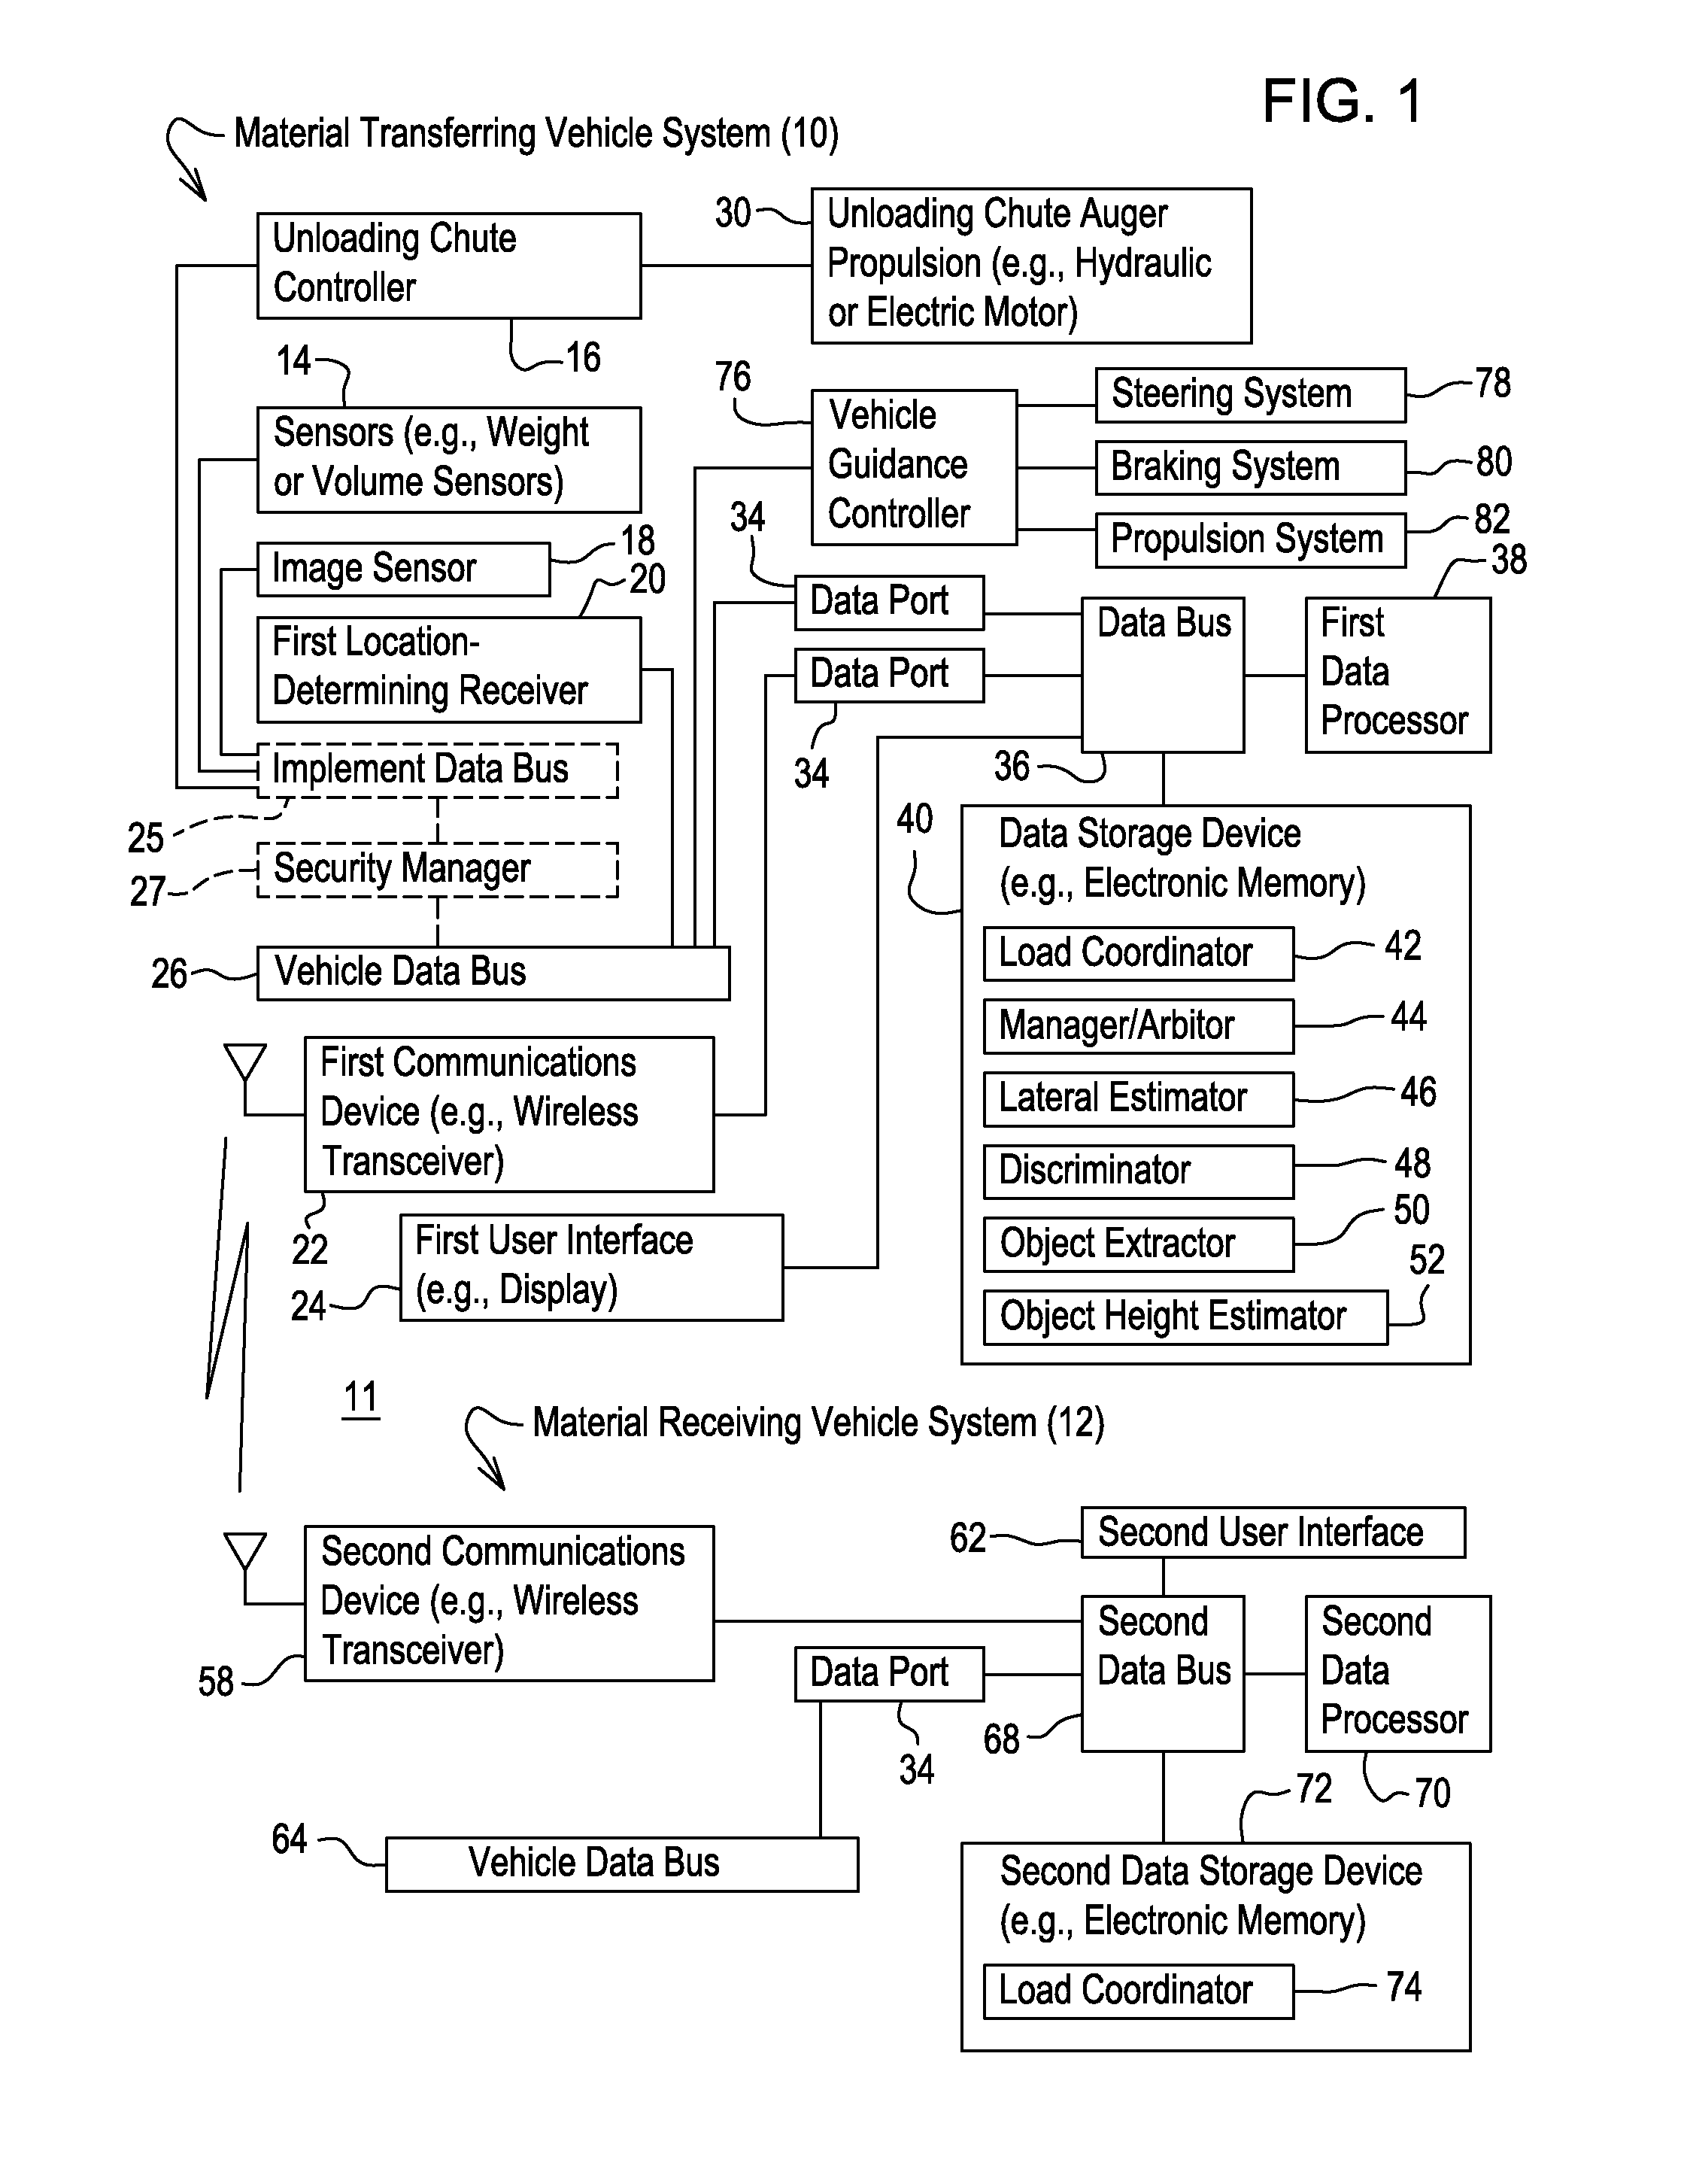 System for automated unloading of an agricultural material